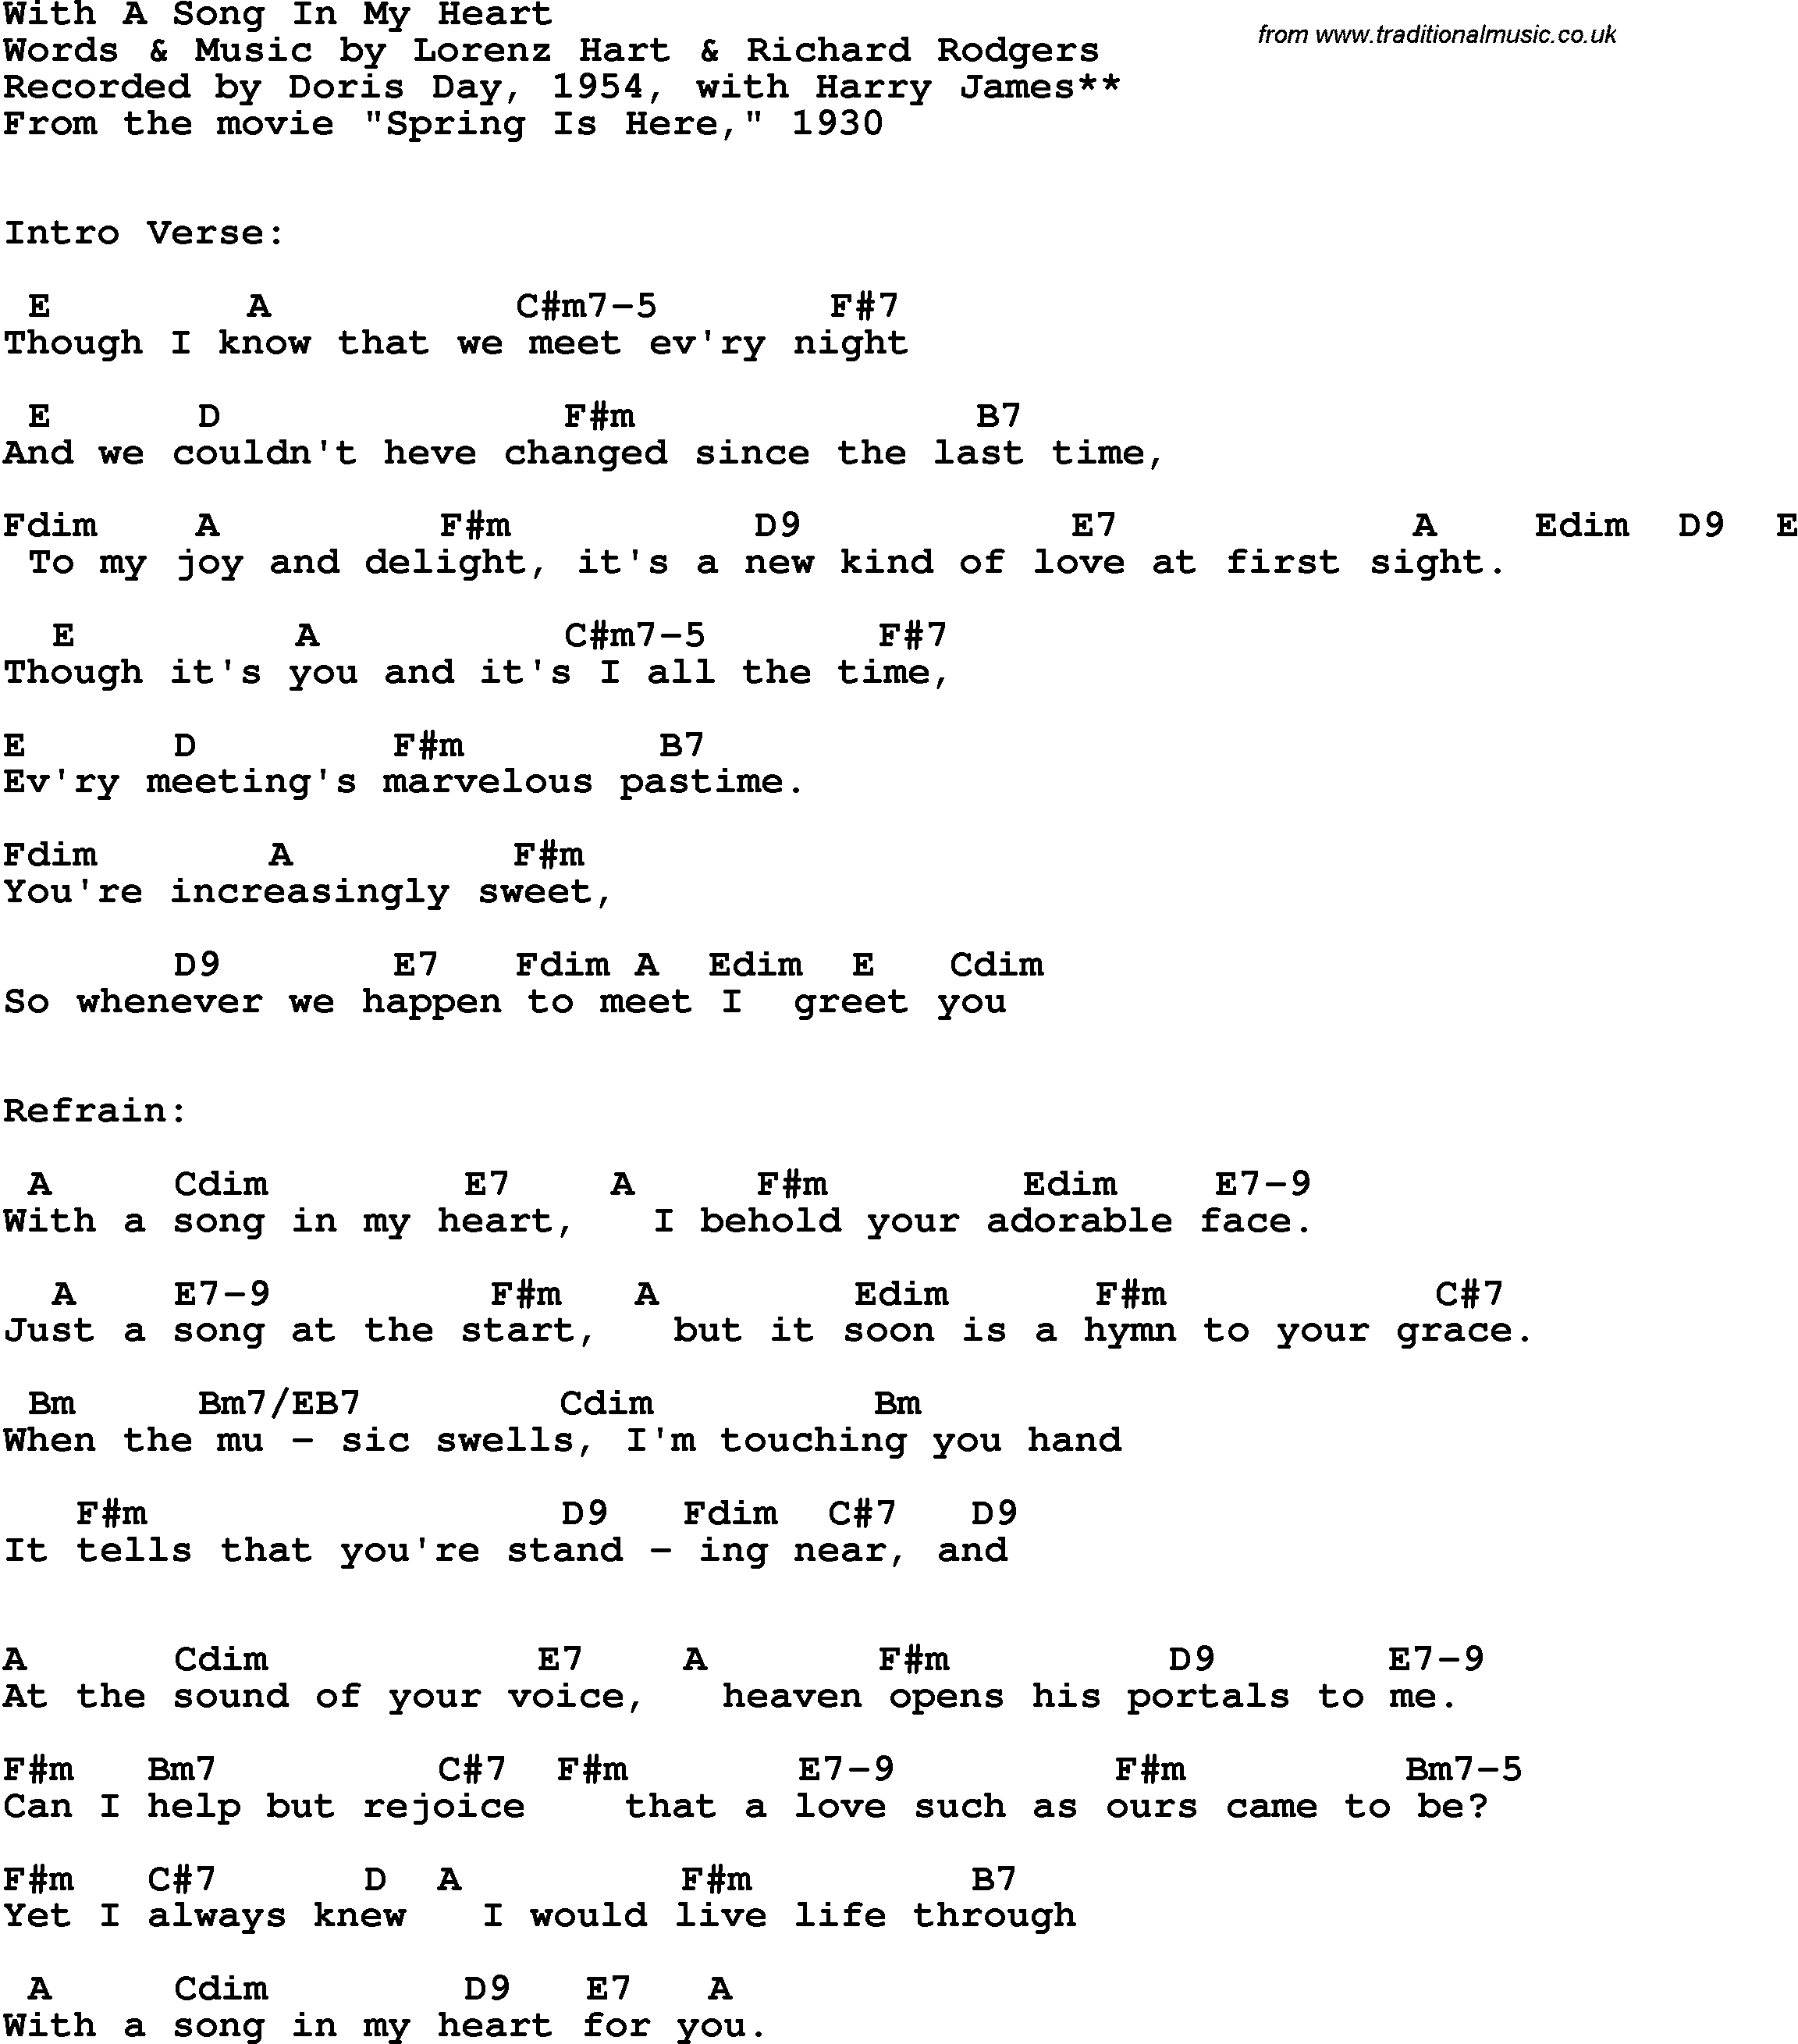 Song Lyrics with guitar chords for With A Song In My Heart - Doris Day, 1954